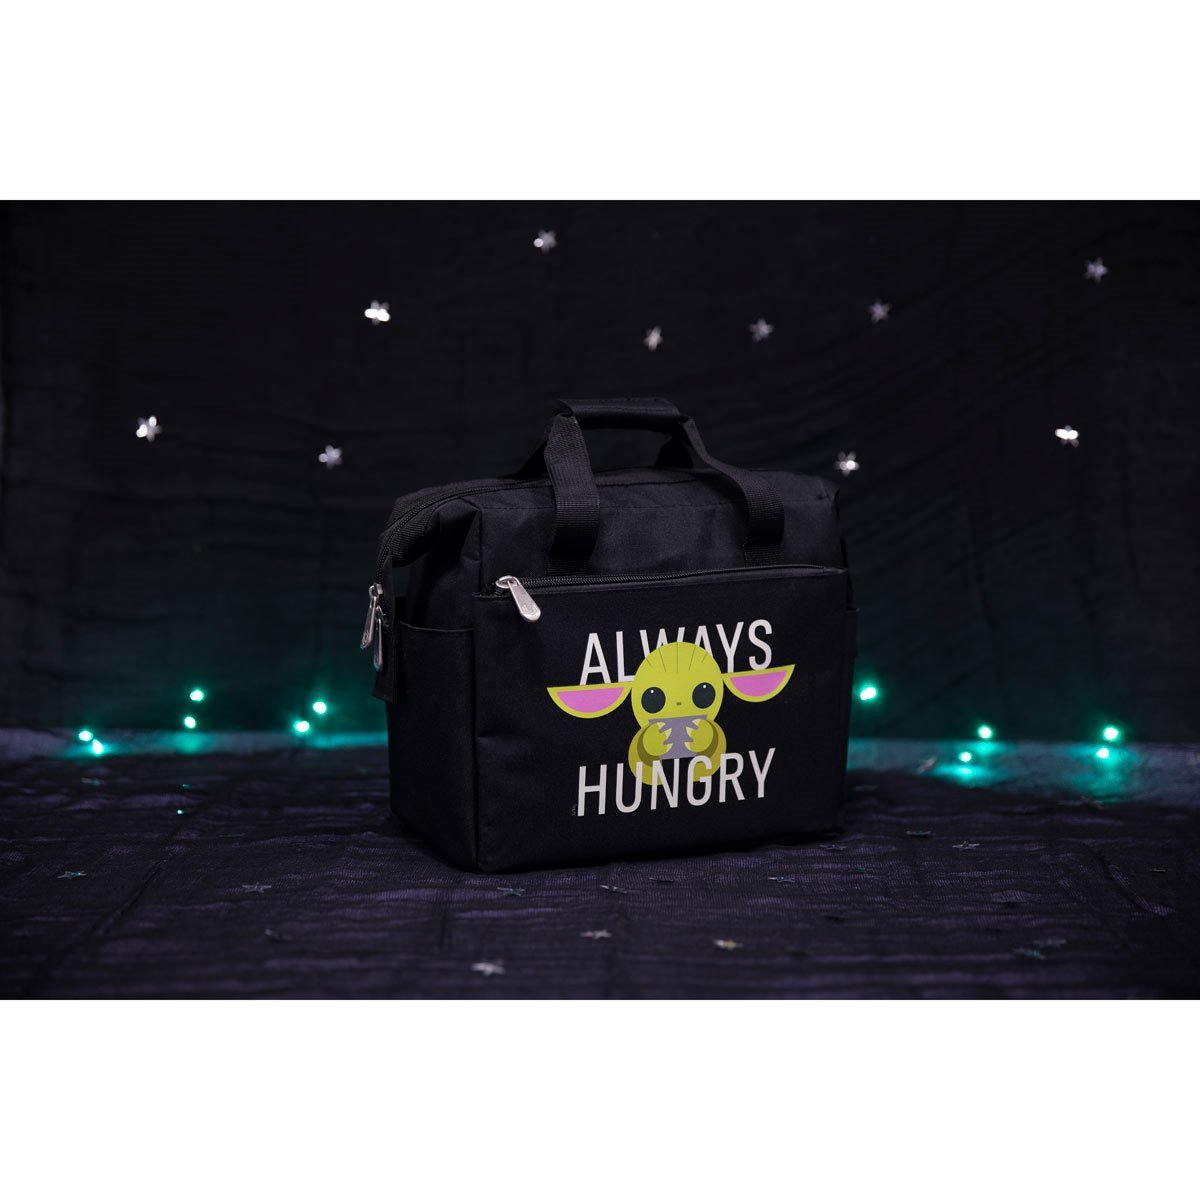 Grogu On-the-Go Lunch Cooler Bag